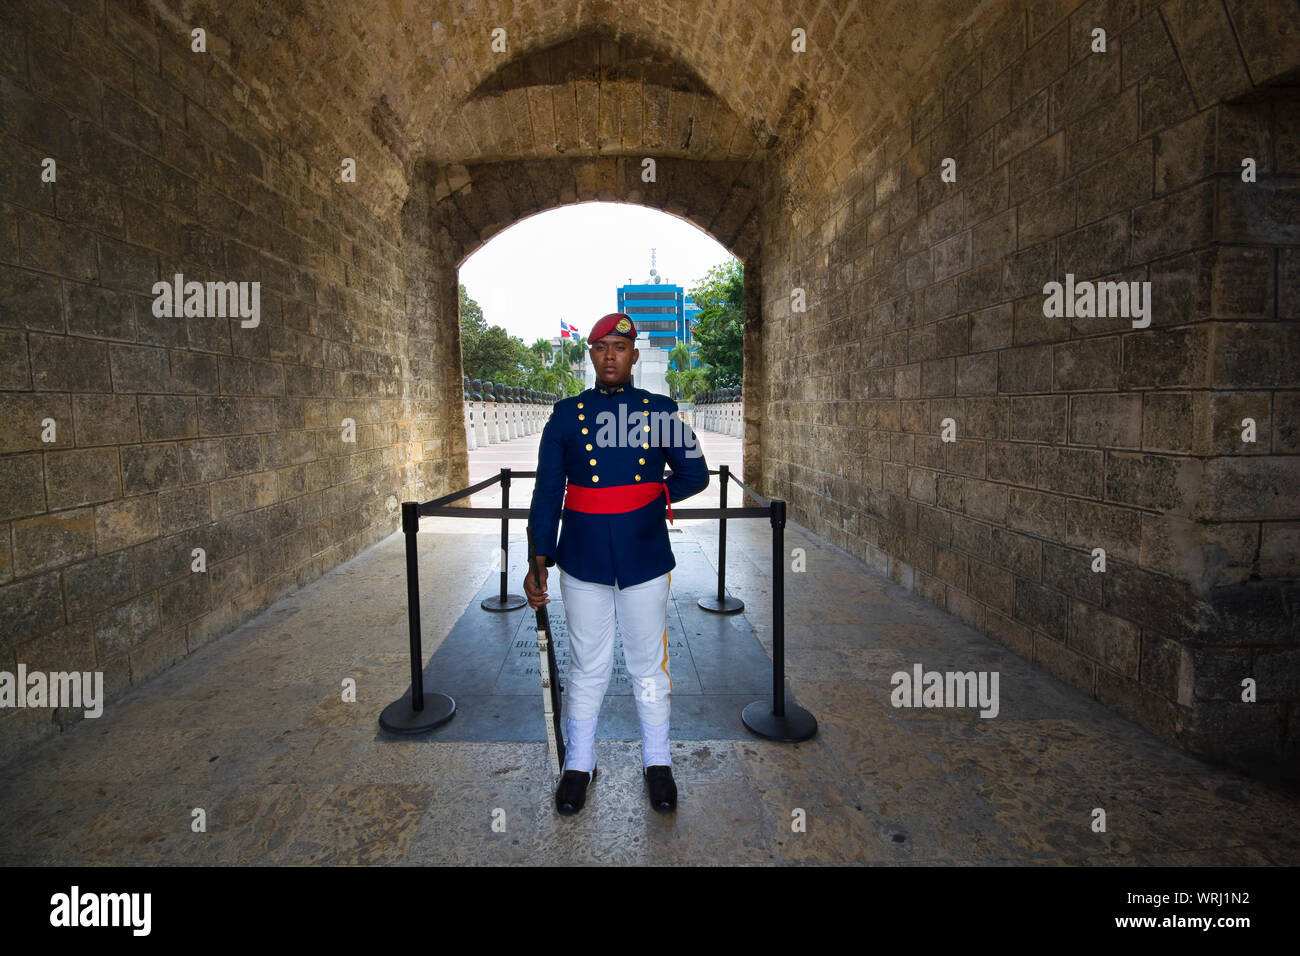 SANTO DOMINGO, DOMINICAN REPUBLIC - JUNE 26, 2019: Armed guard in La Puerta del Conde (Count's Gate), behind there is Independence Park and Altar of t Stock Photo